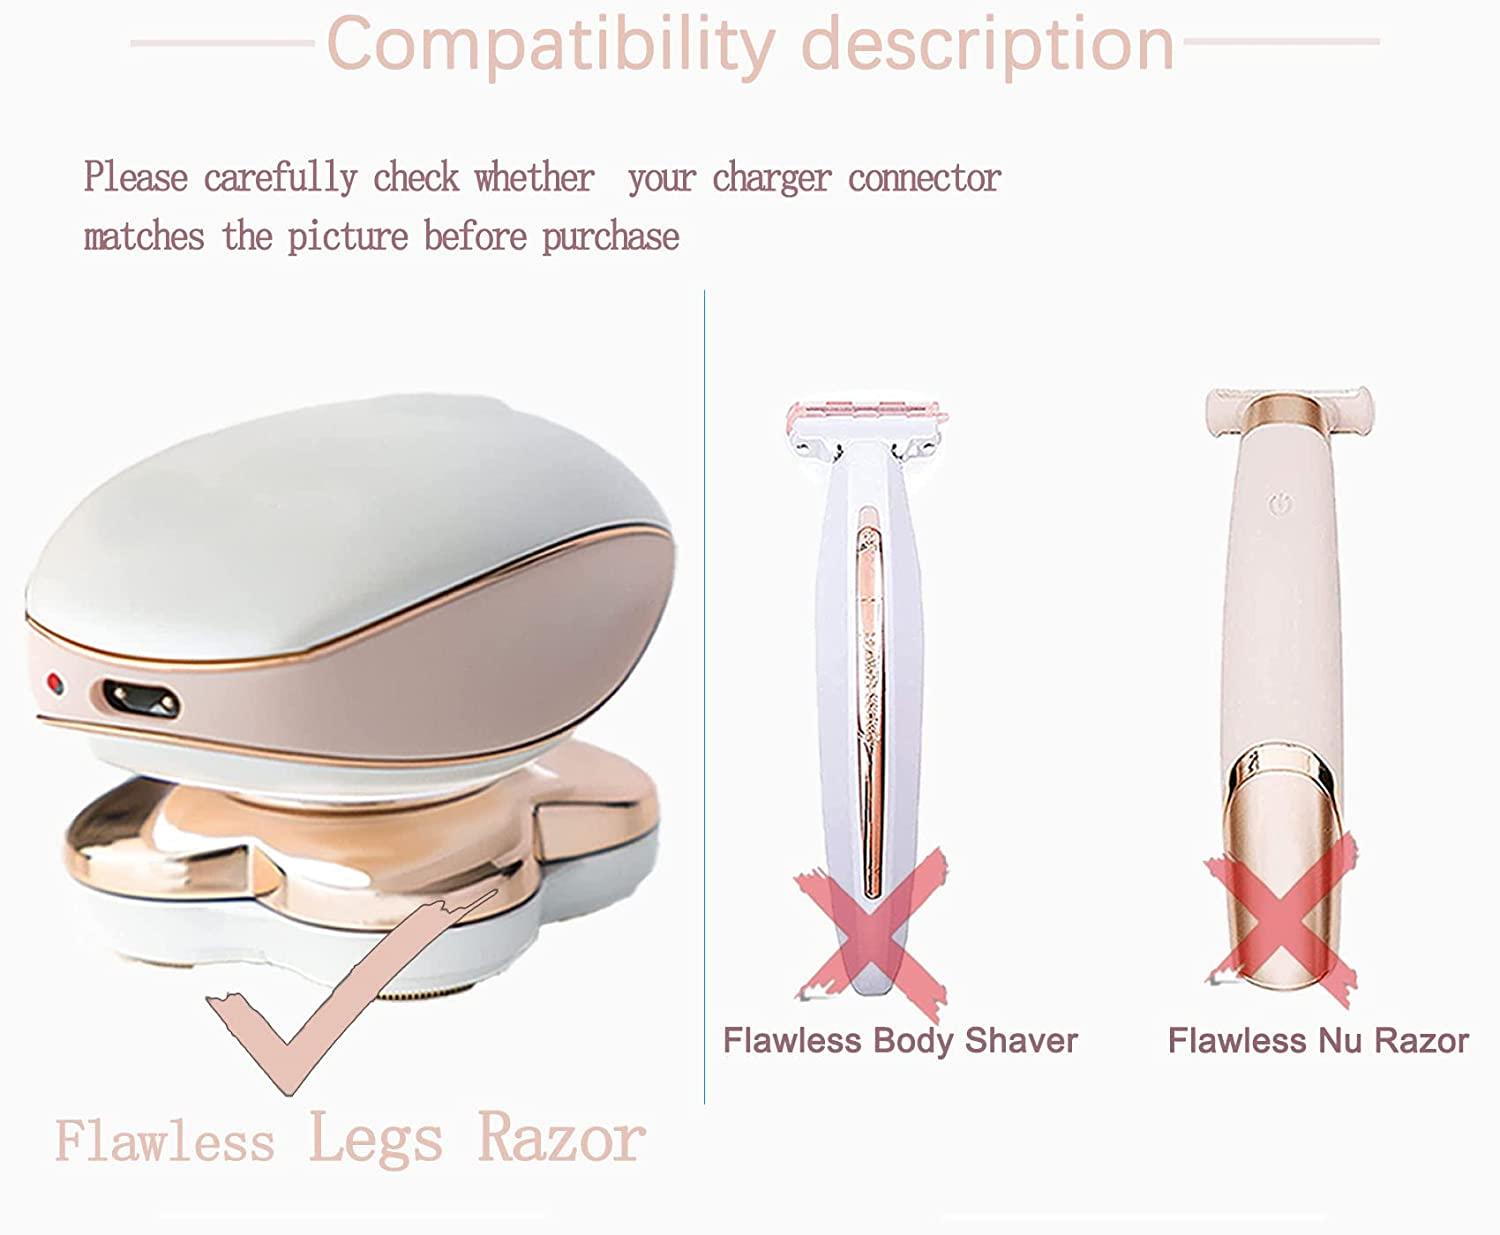 Legs Hair Remover Charger Cord for Flawless Legs Charger Cord